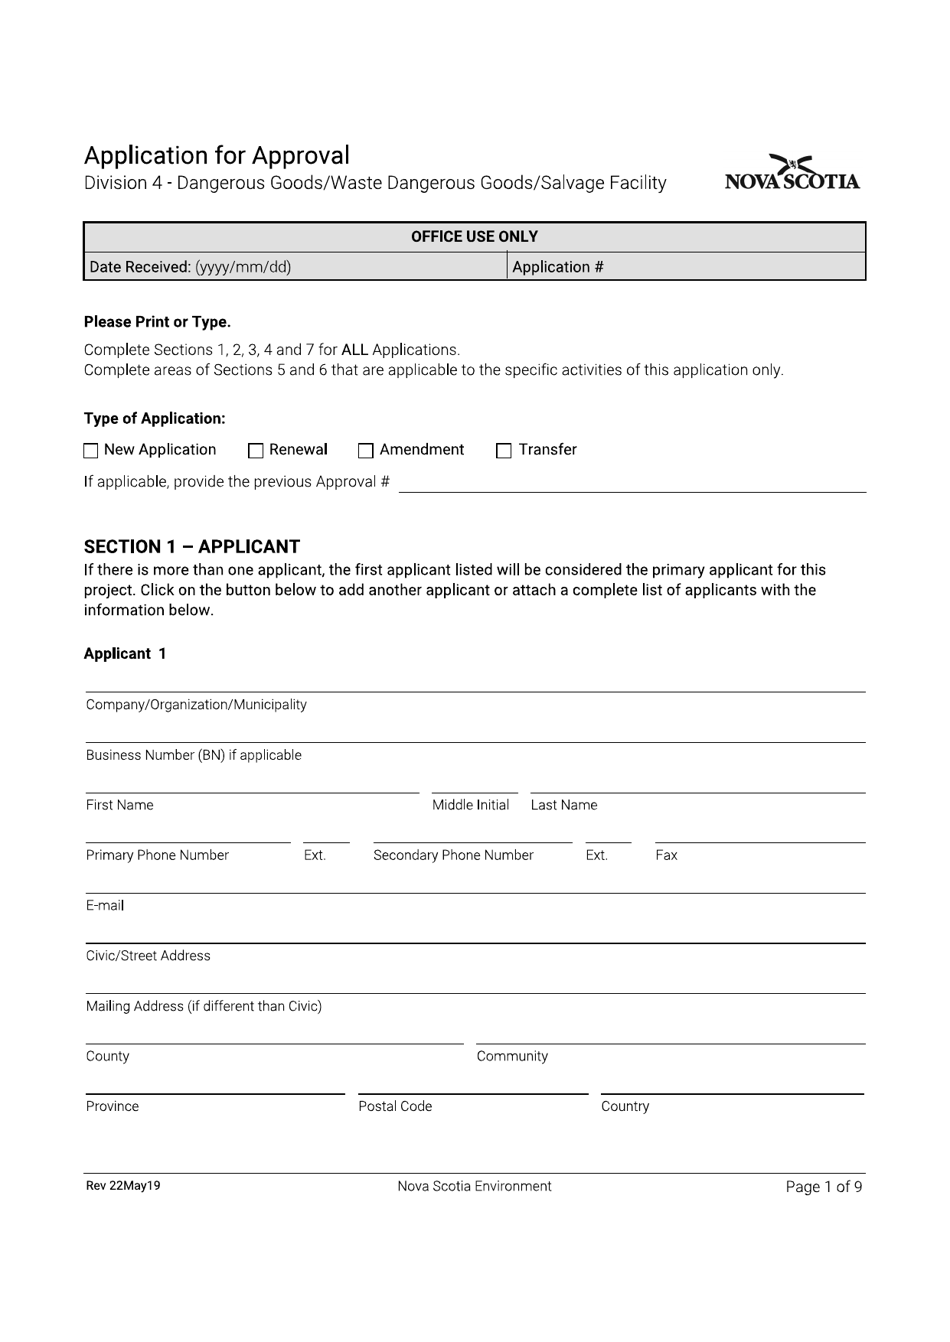 Application for Approval - Dangerous Goods / Waste Dangerous Goods / Salvage Facility - Nova Scotia, Canada, Page 1